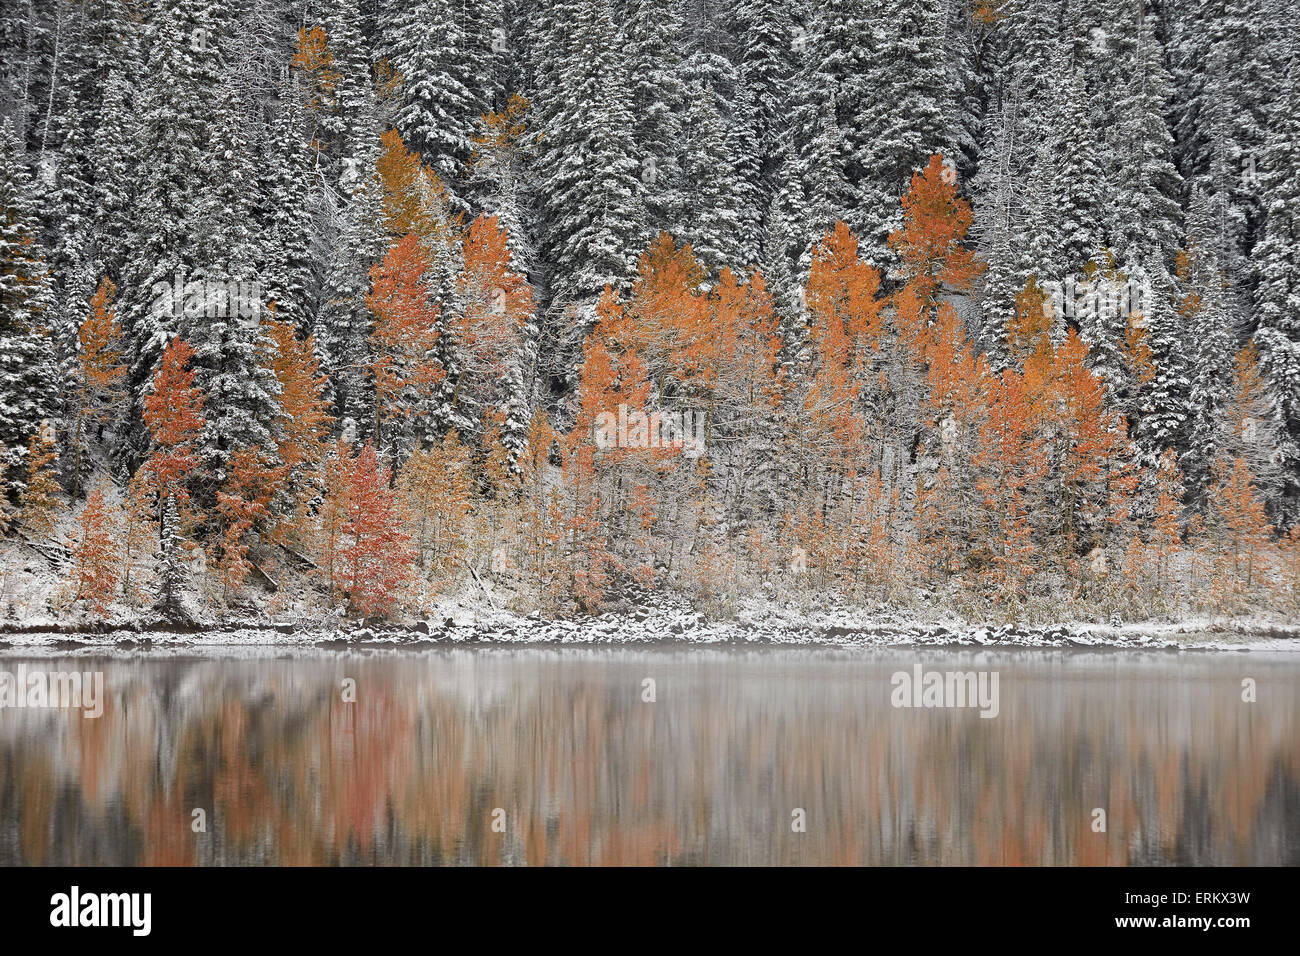 Orange aspens in the fall among evergreens covered with snow at a lake, Grand Mesa National Forest, Colorado, USA Stock Photo